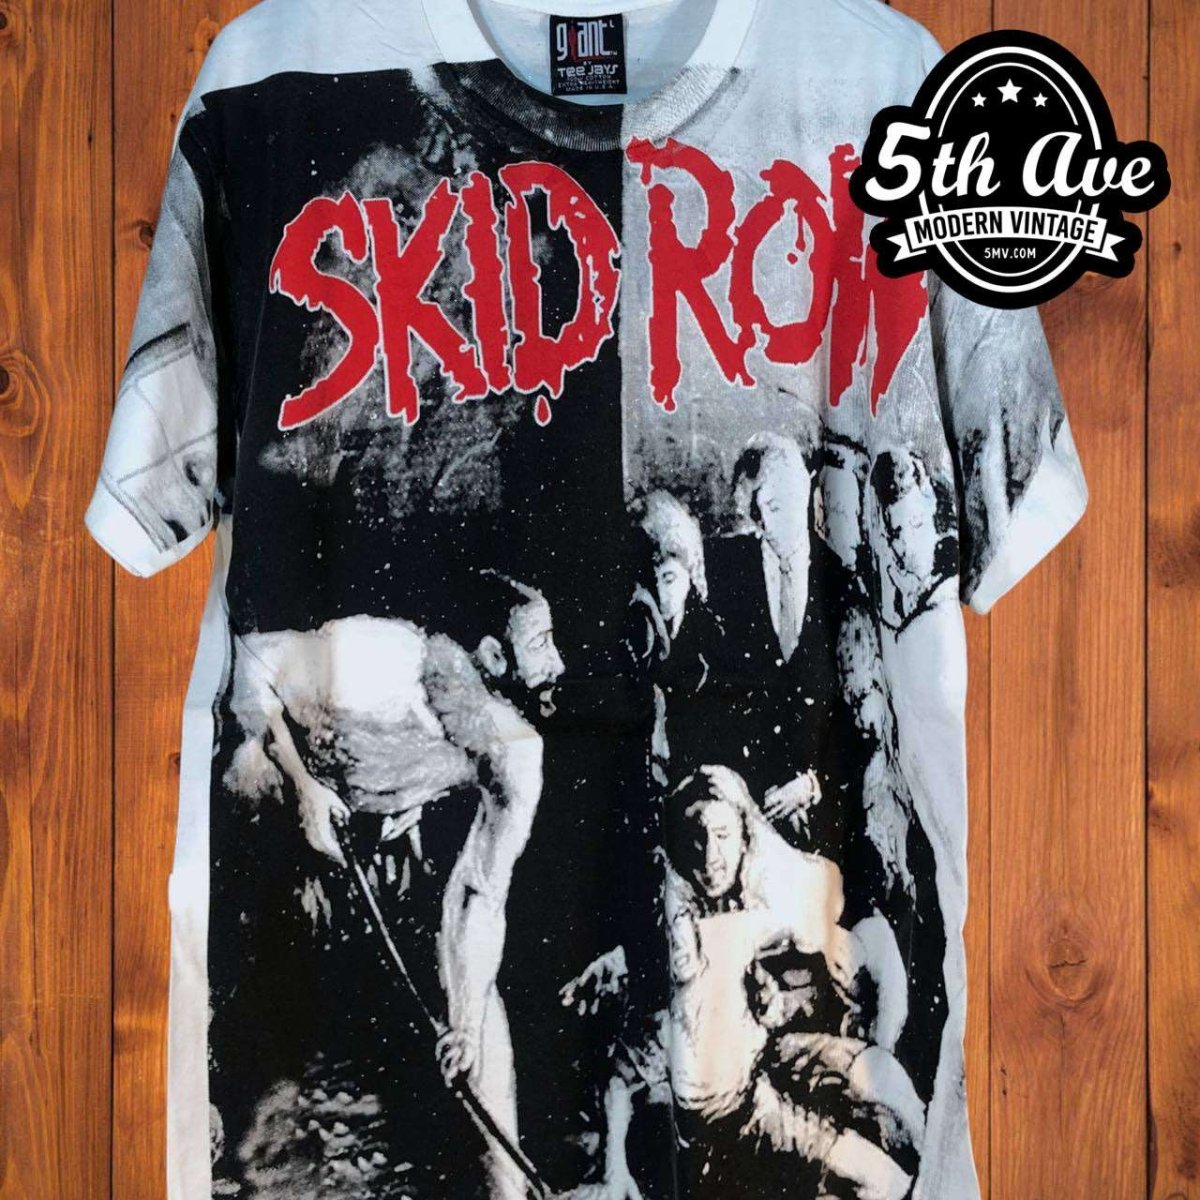 Skid Row - AOP all over print New Vintage Band T shirt - Vintage